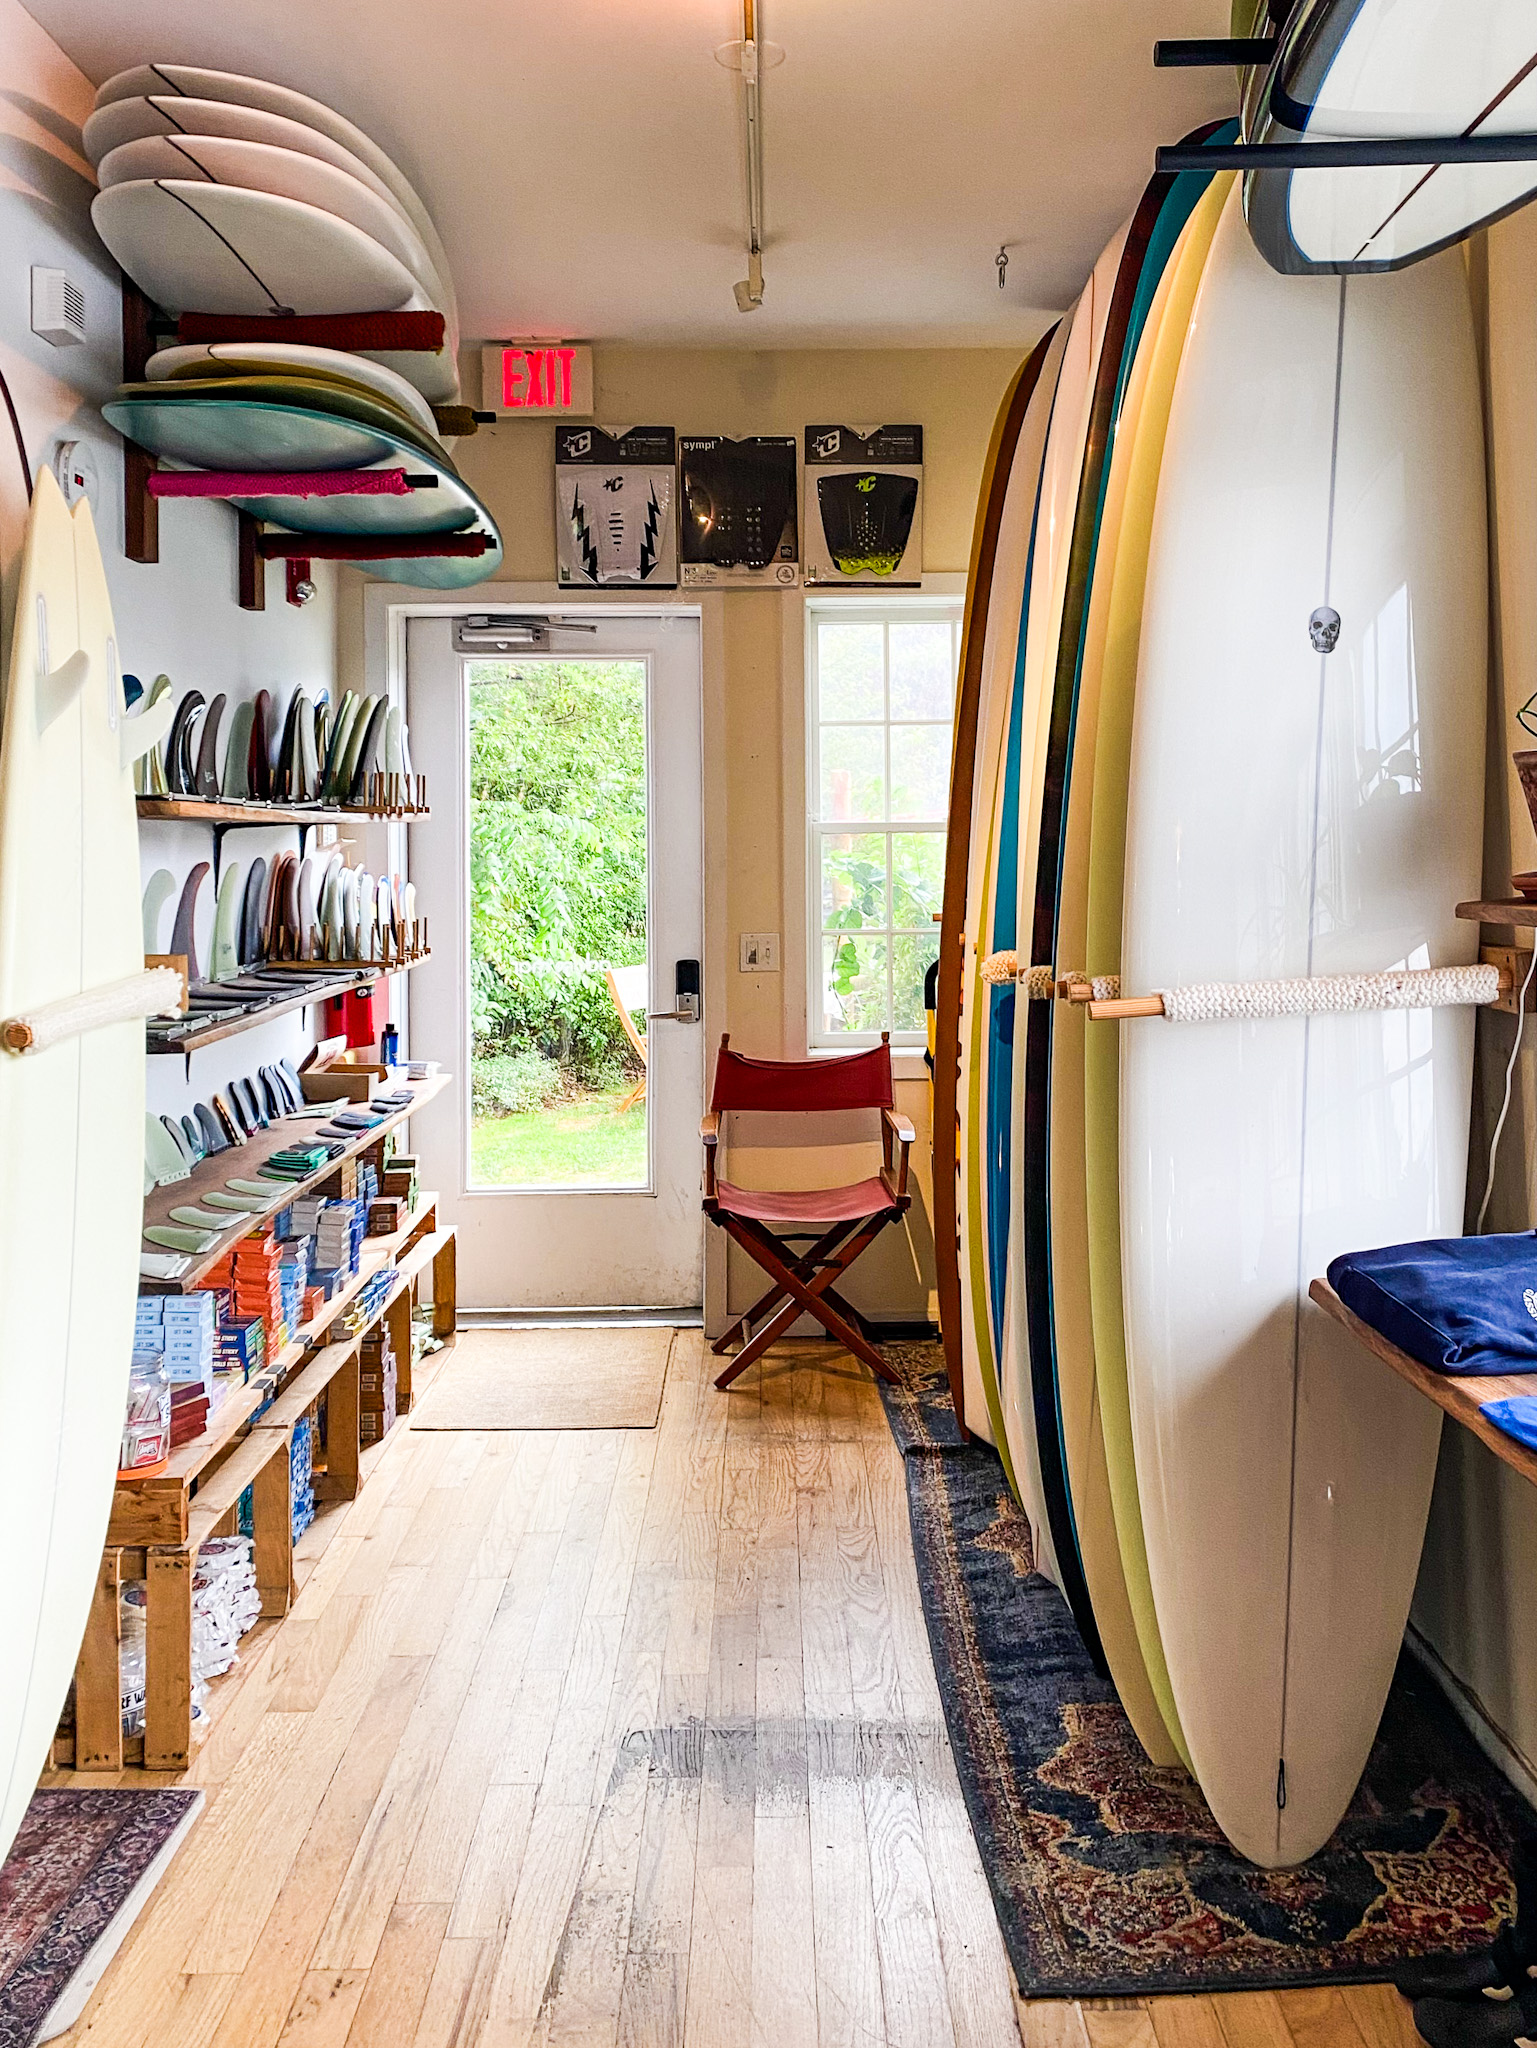 Pants — Adam Mar, Quality Clothing and Gear, Montauk Surf Shop